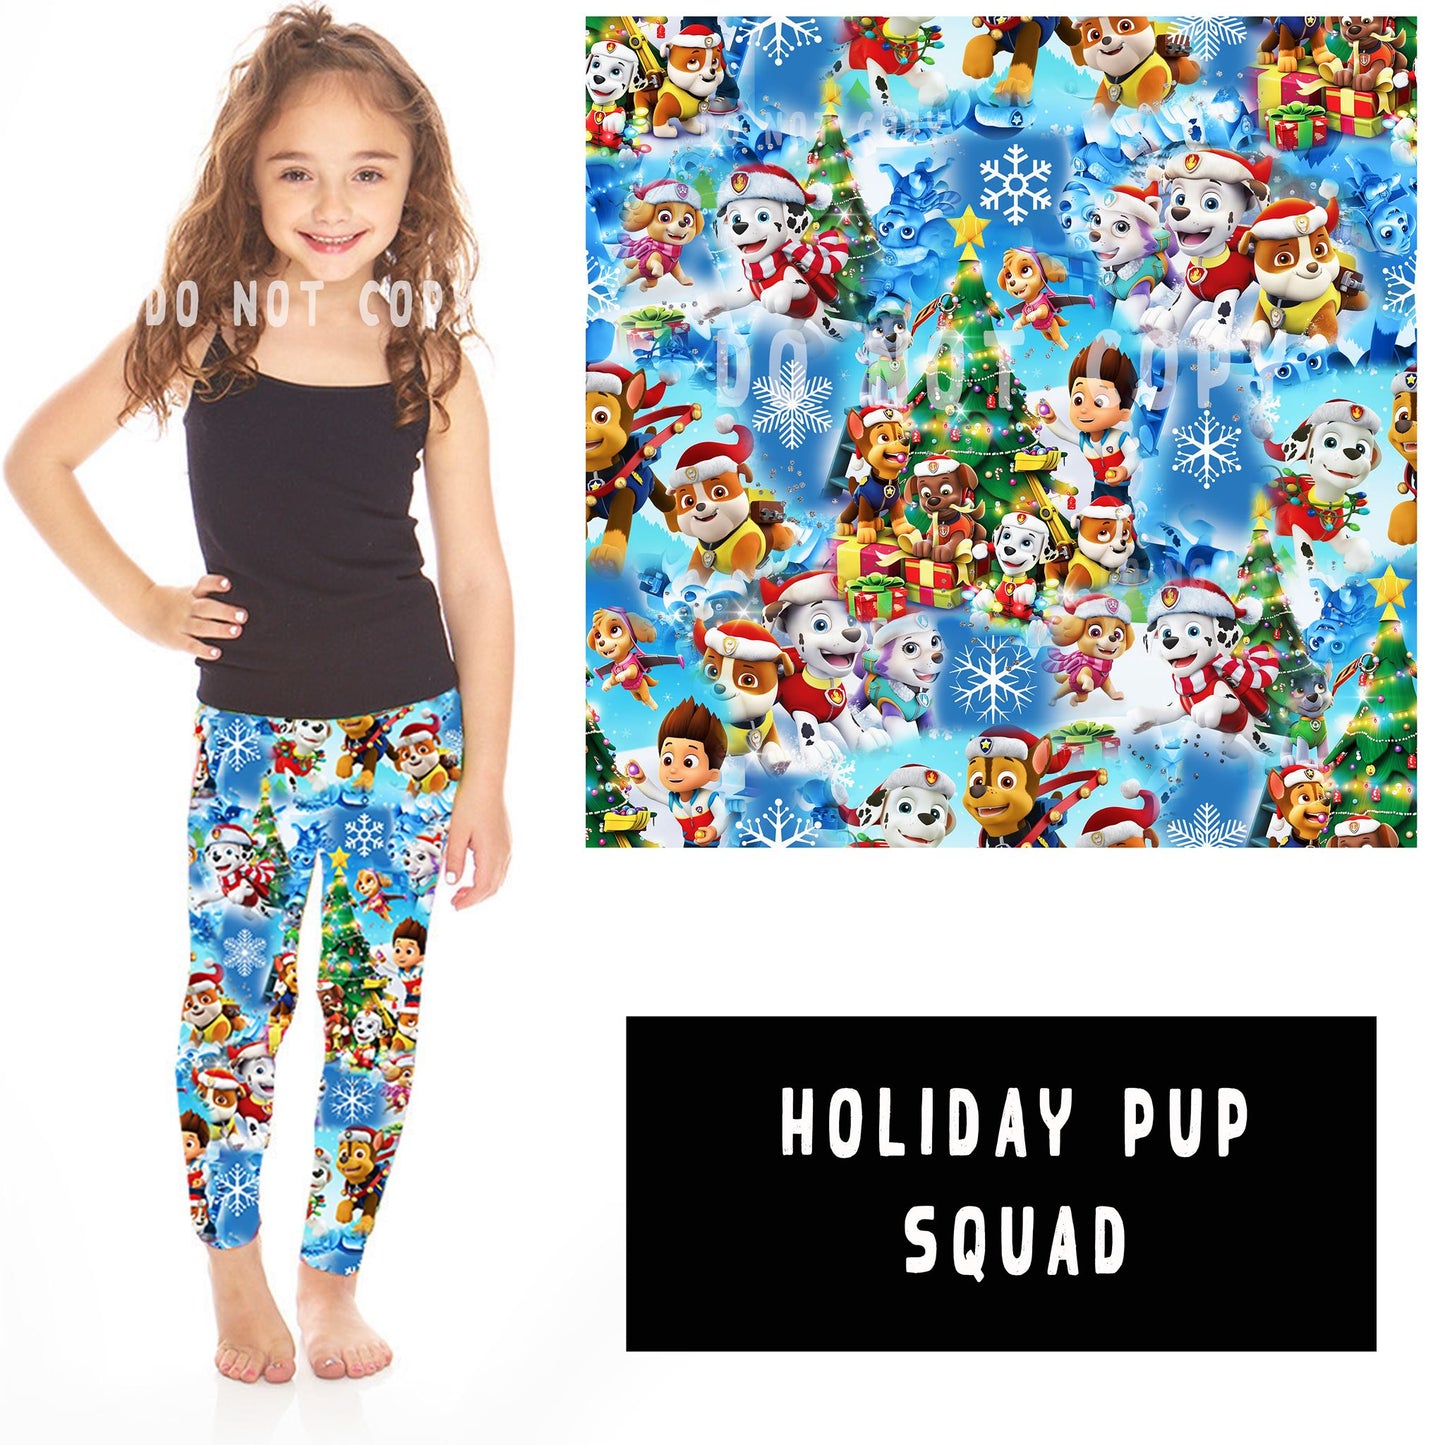 XMAS IN JULY RUN-HOLIDAY PUP SQUAD KIDS LEGGINGS/JOGGERS - Alonna's Legging Land